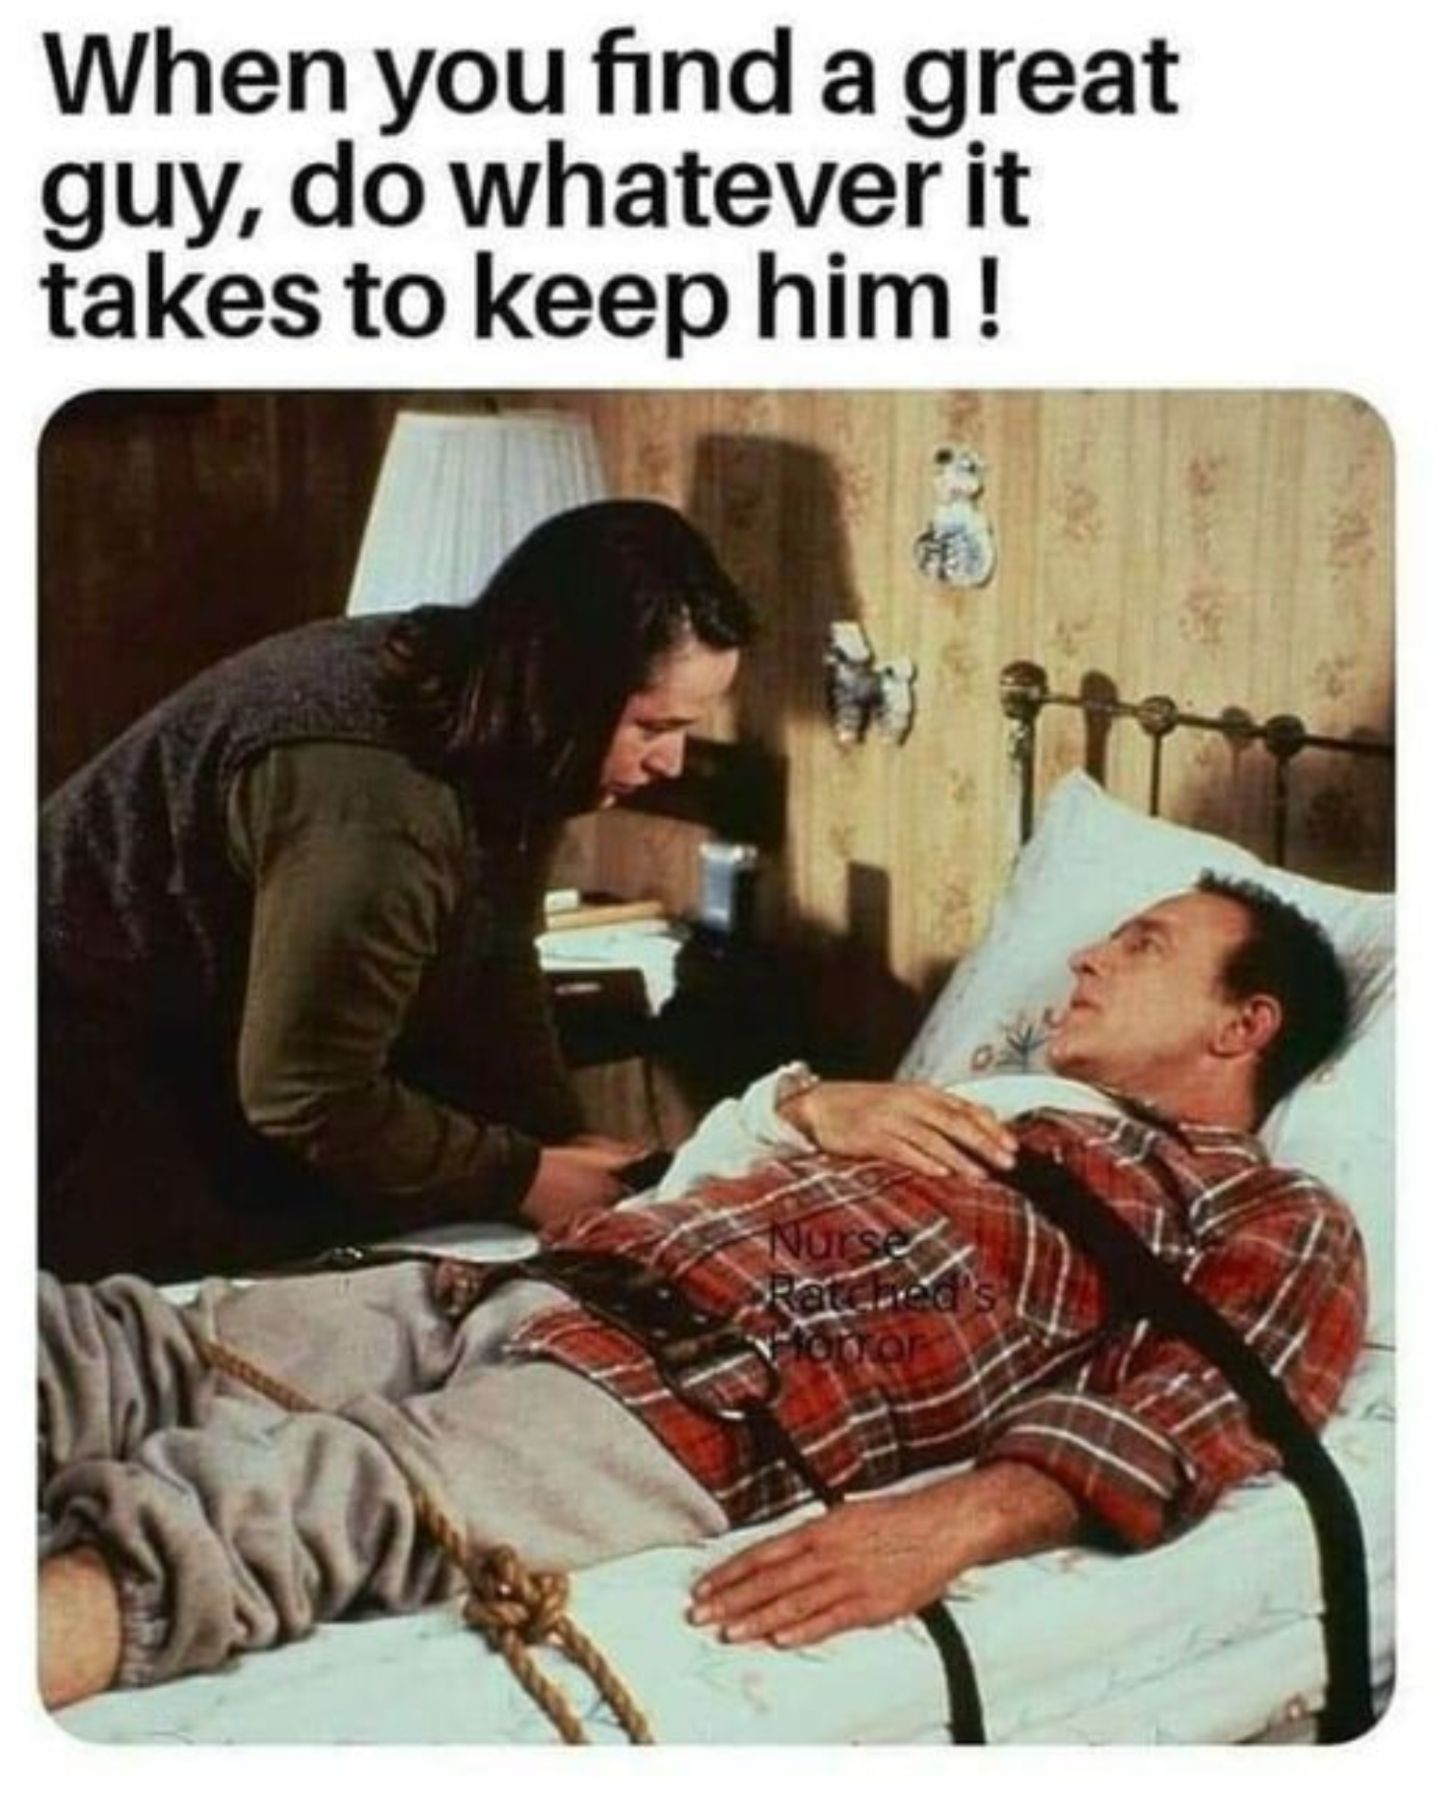 Meme about the plot from Misery. 